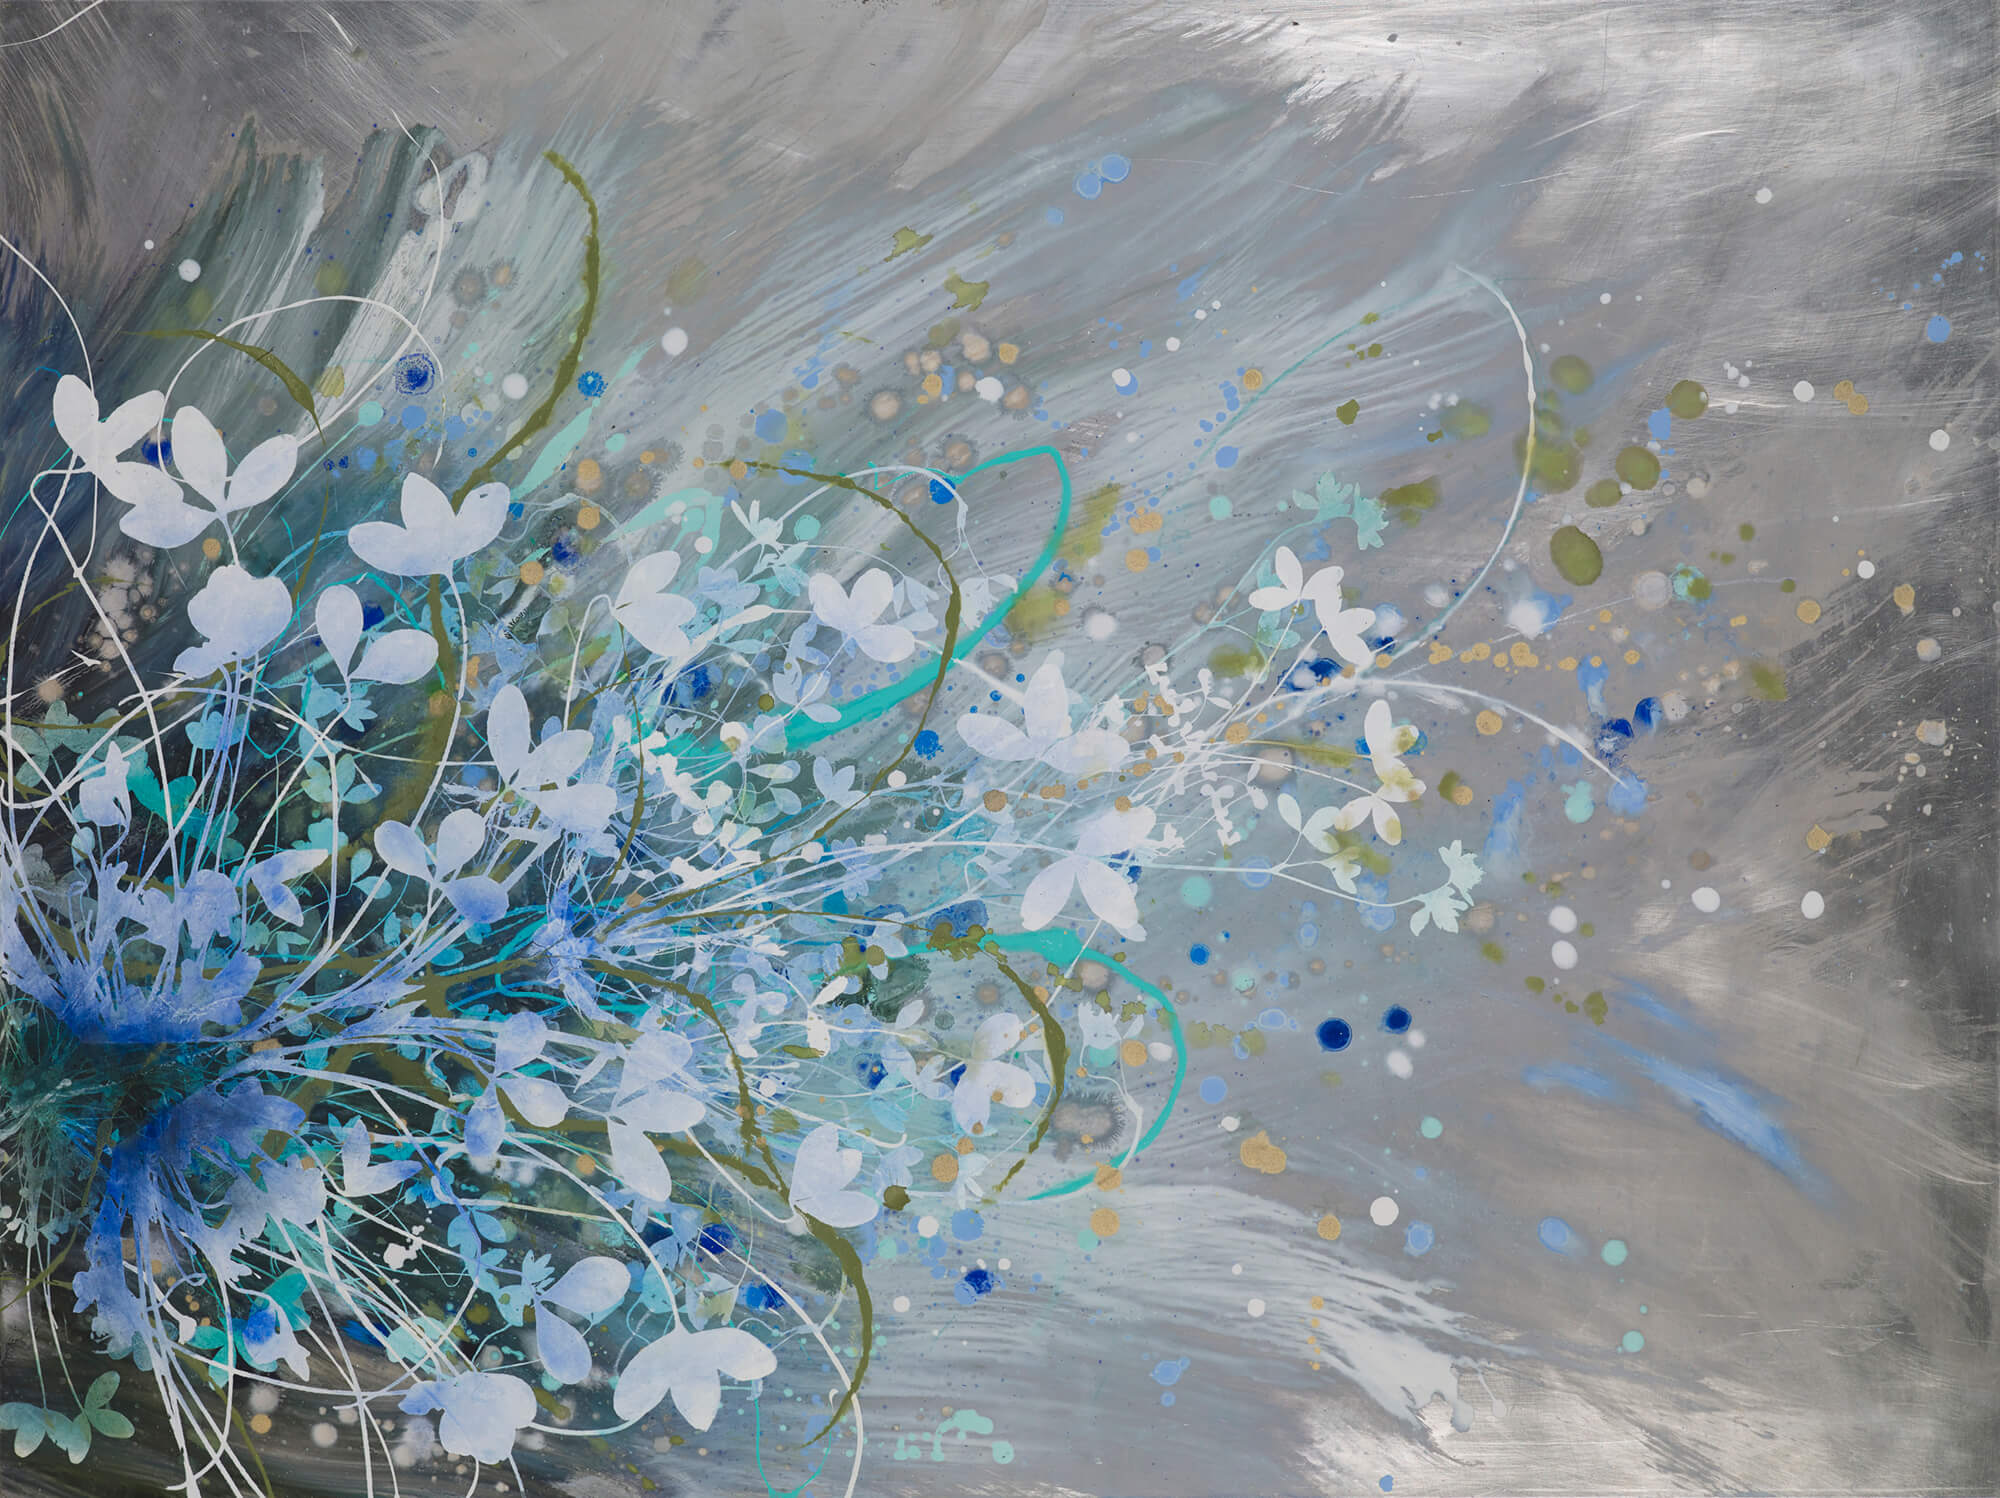 Clover Bloom, oil on aluminum panel, 36 x 48 inches